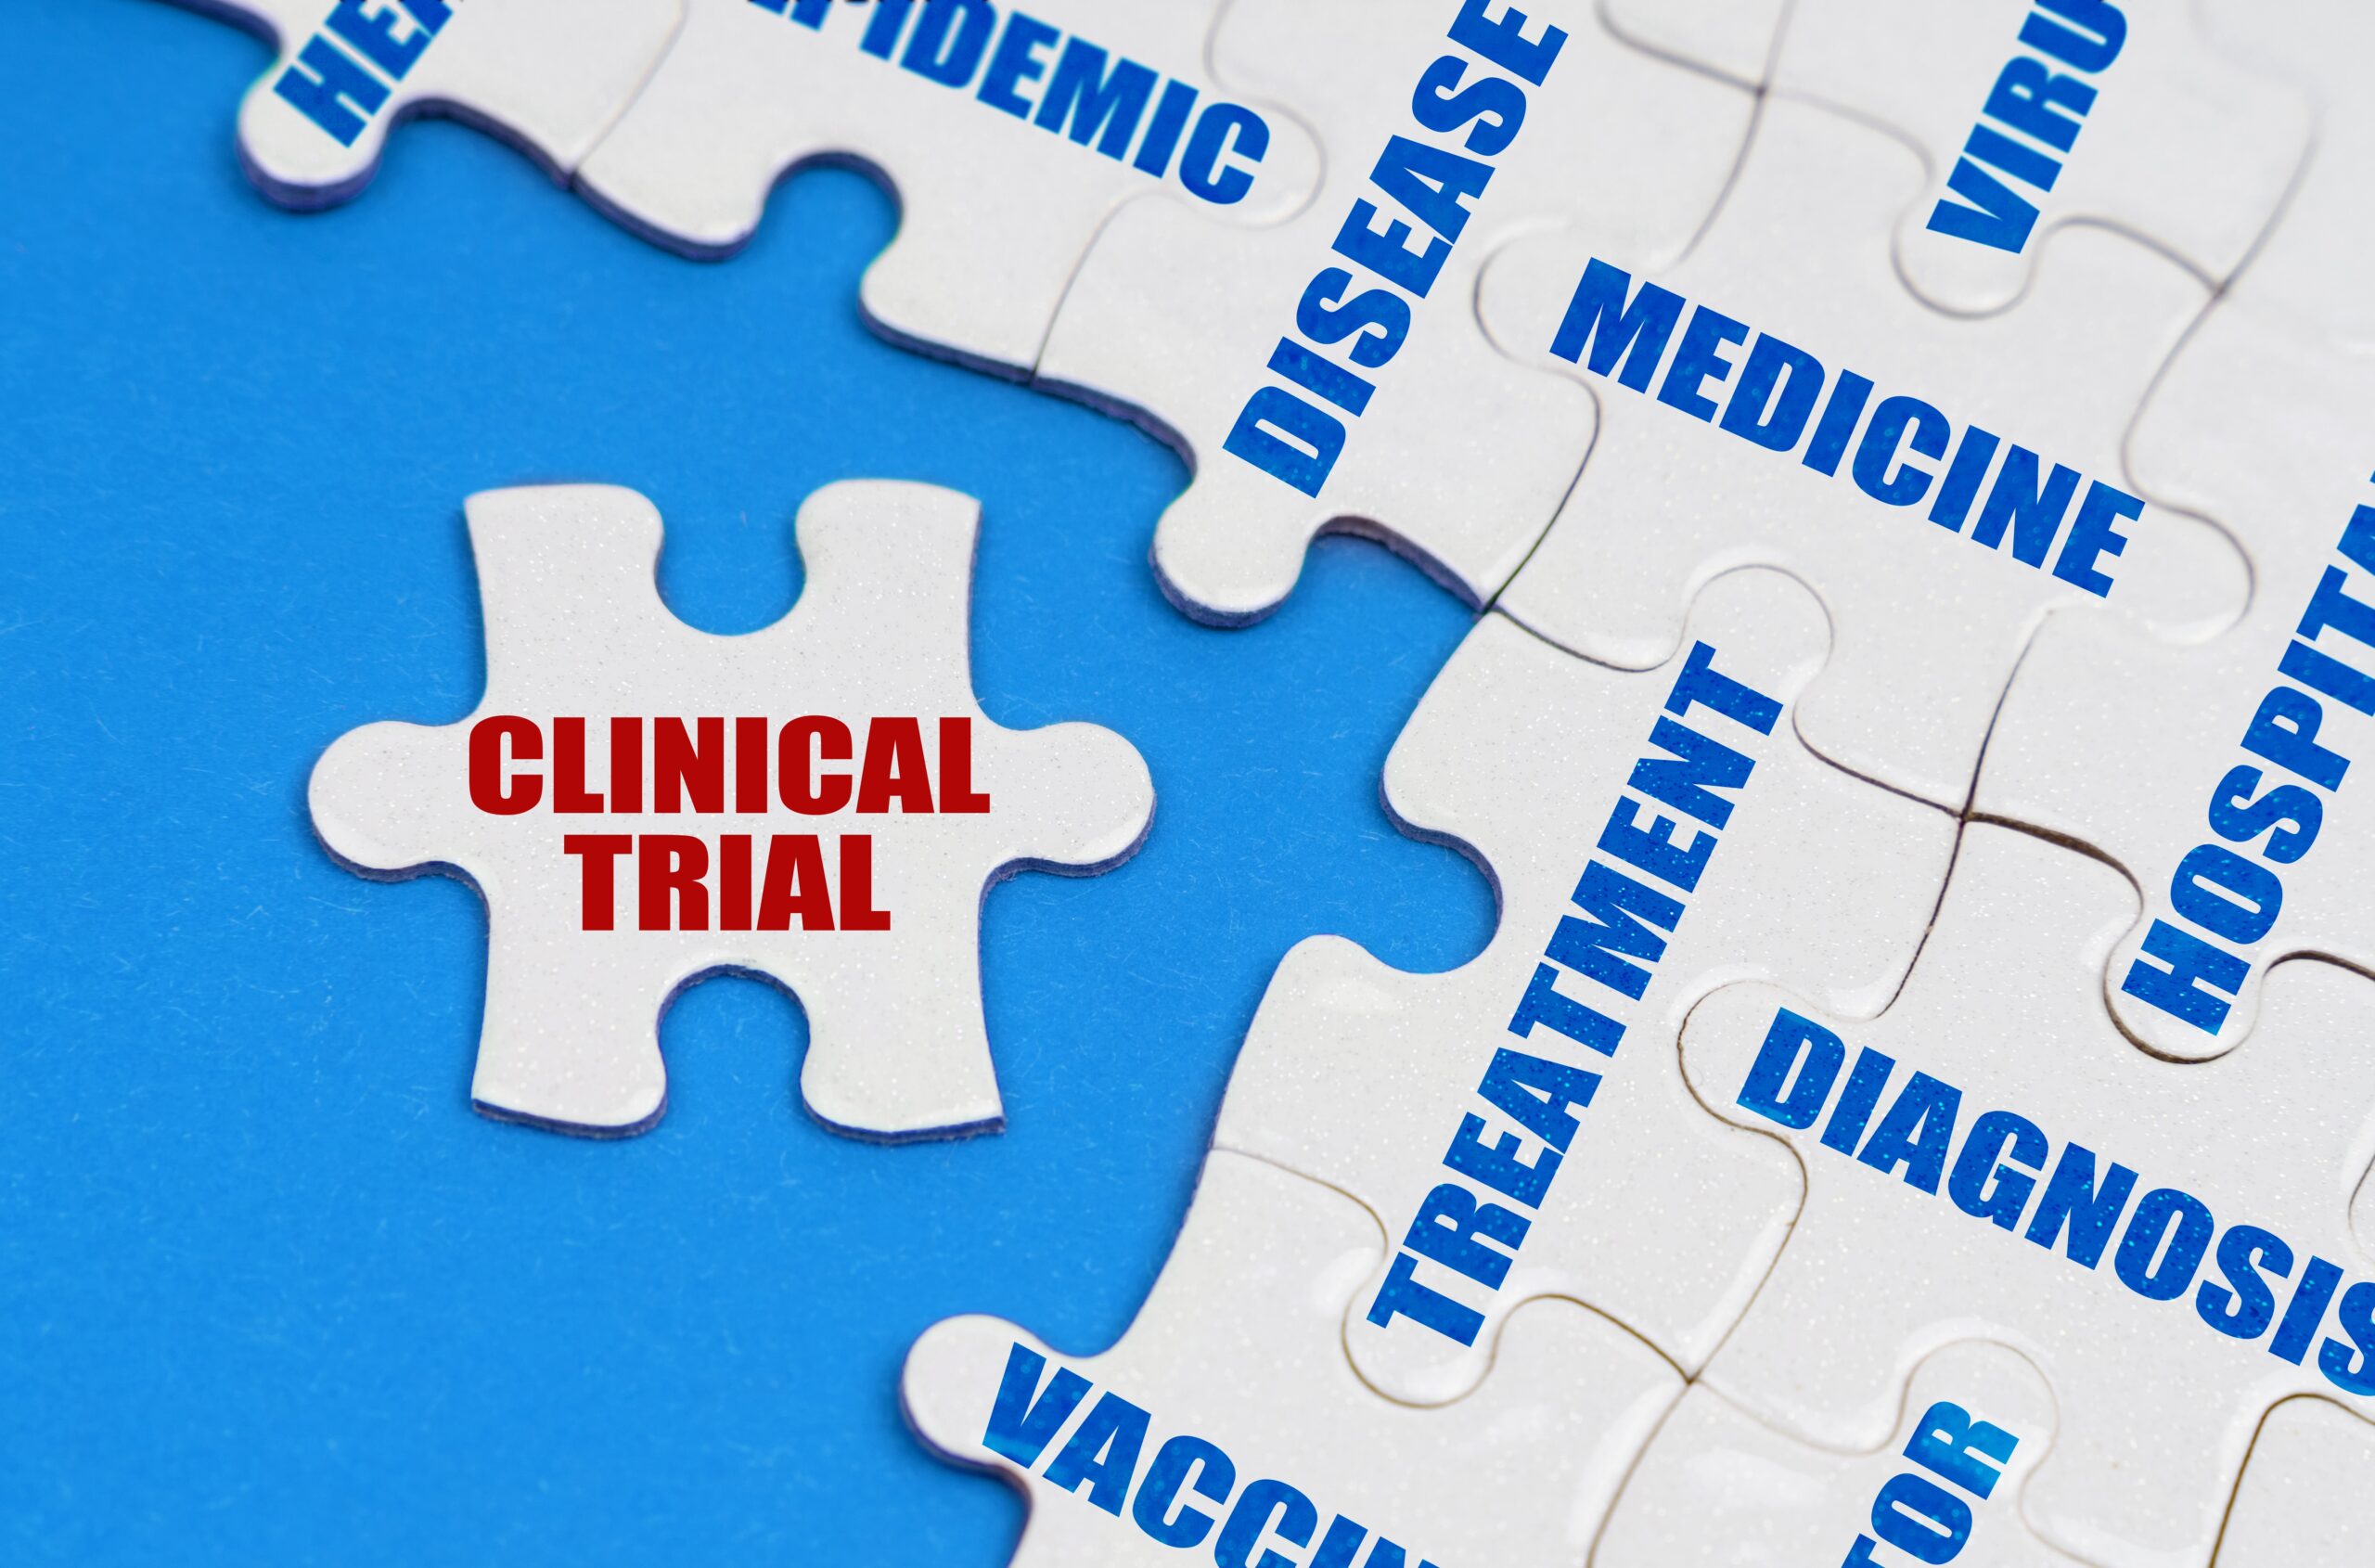 Puzzle pieces with medical terms like clincal trial